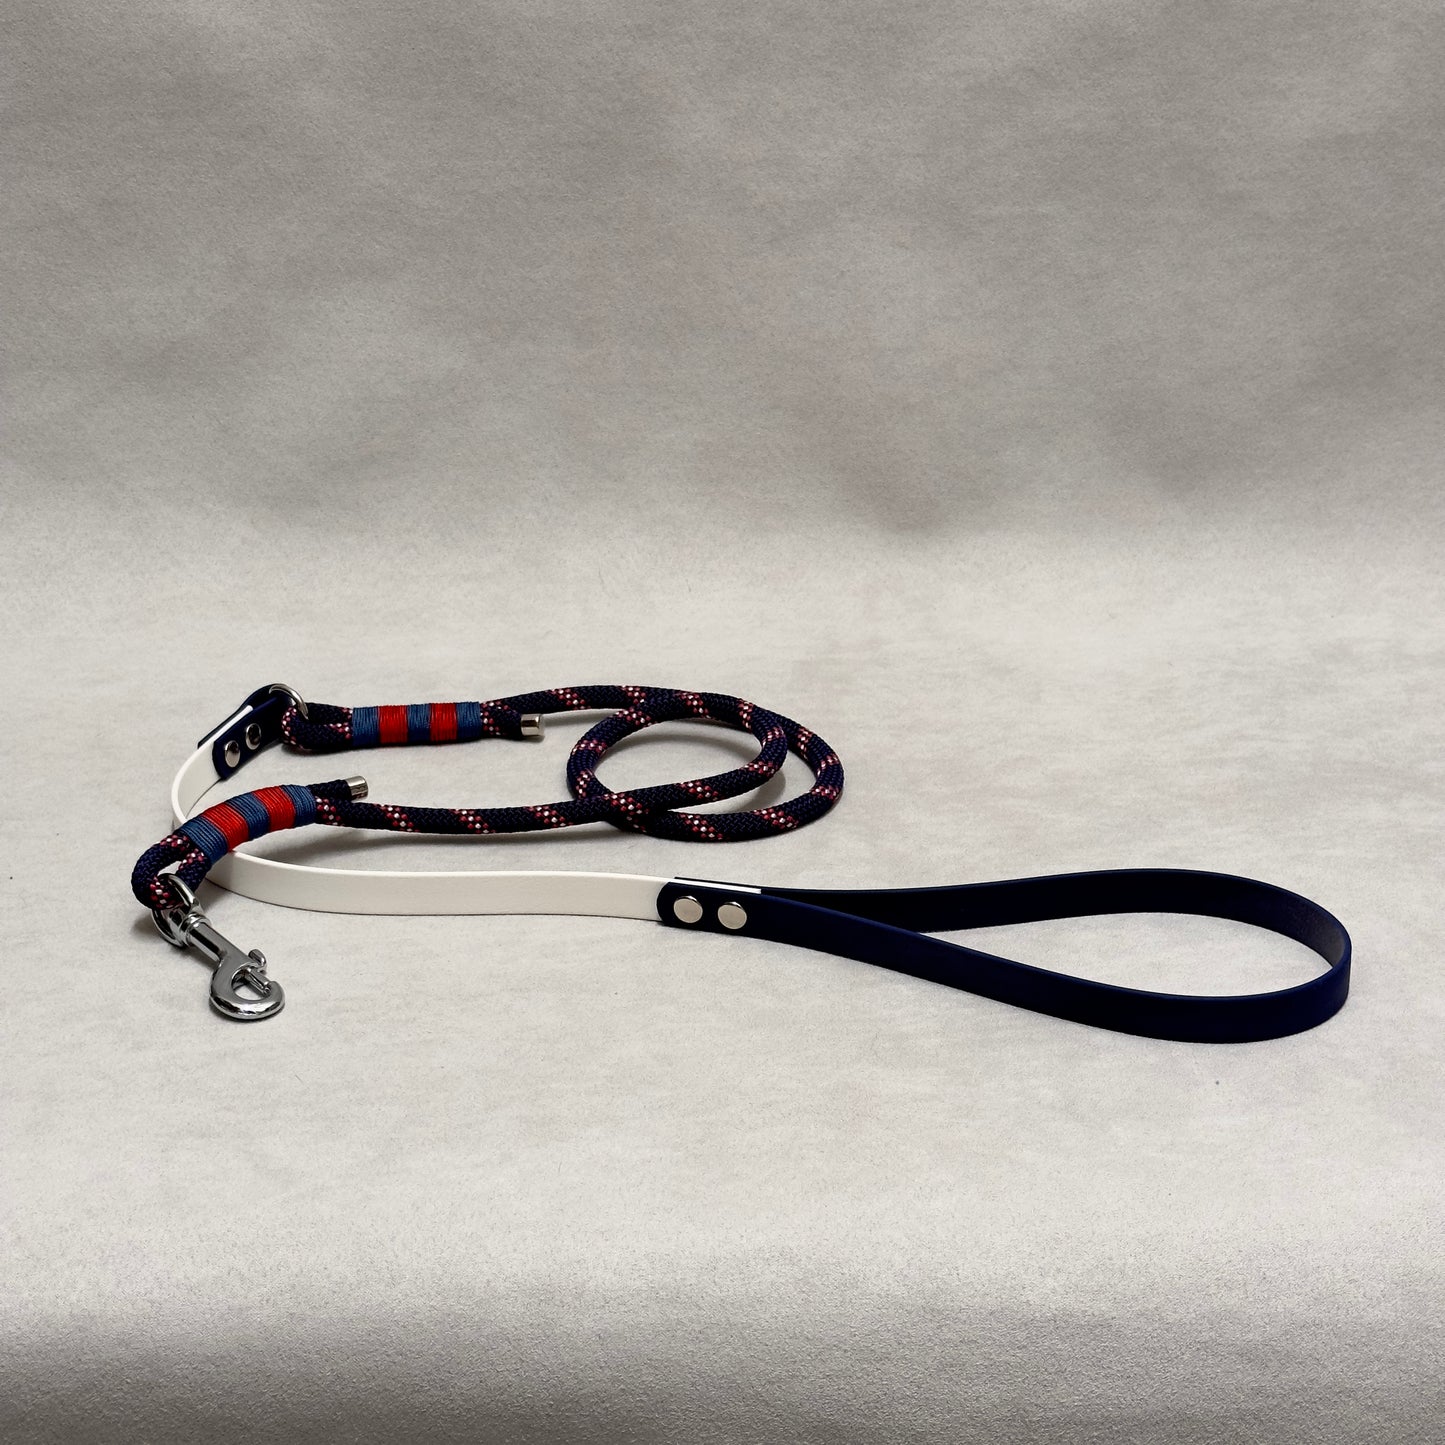 Multicolored rope and biothane 16mm leash